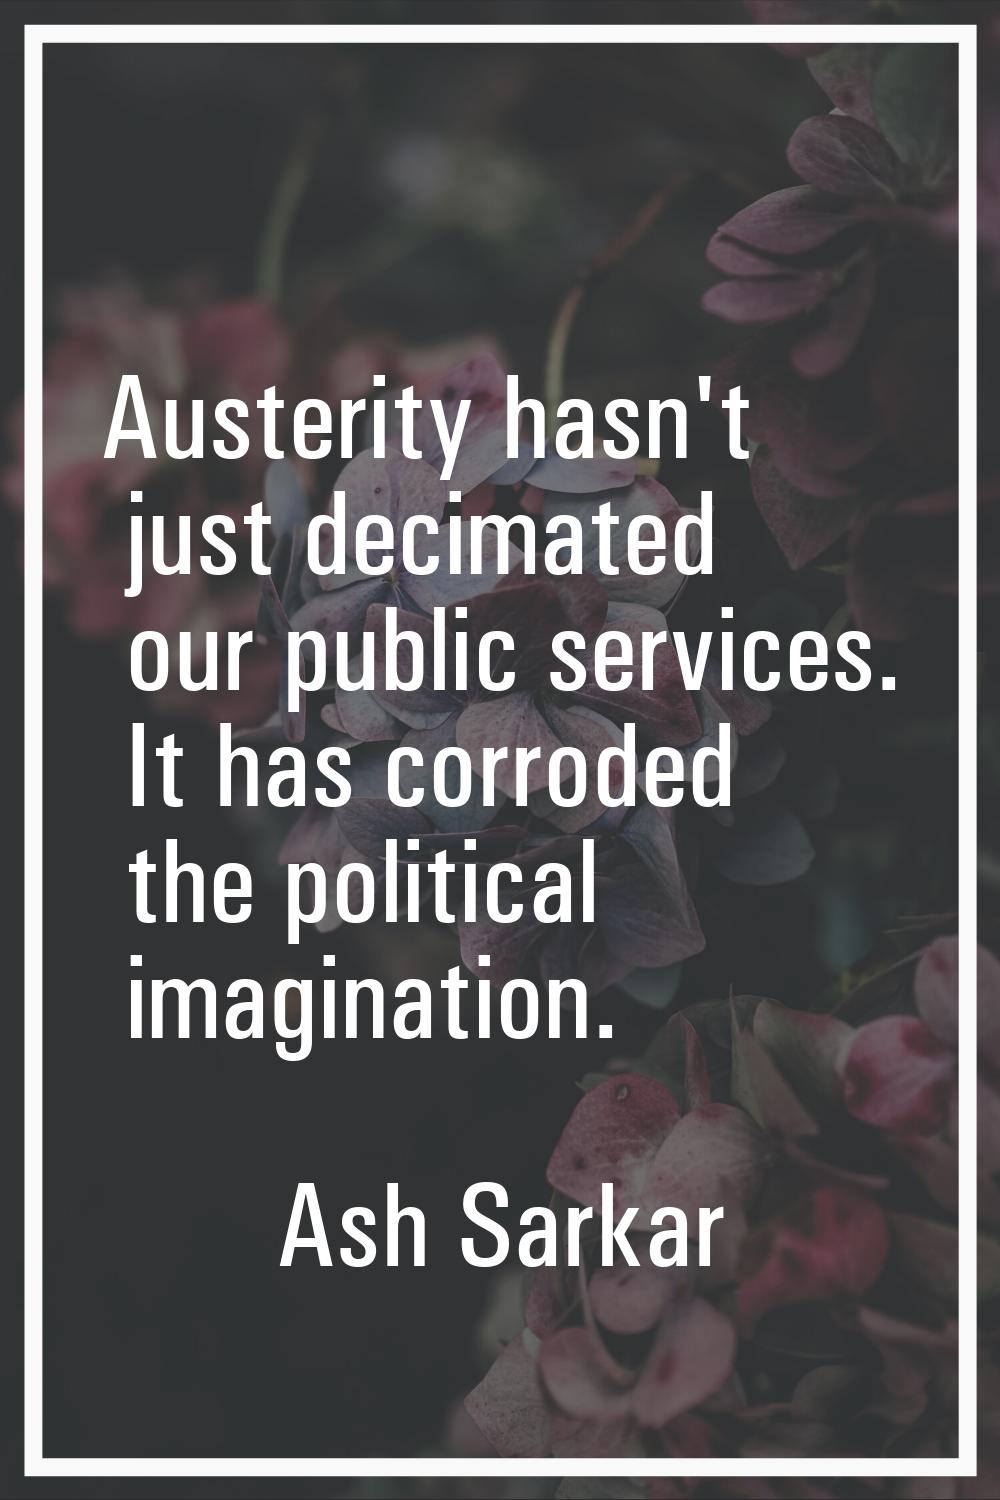 Austerity hasn't just decimated our public services. It has corroded the political imagination.